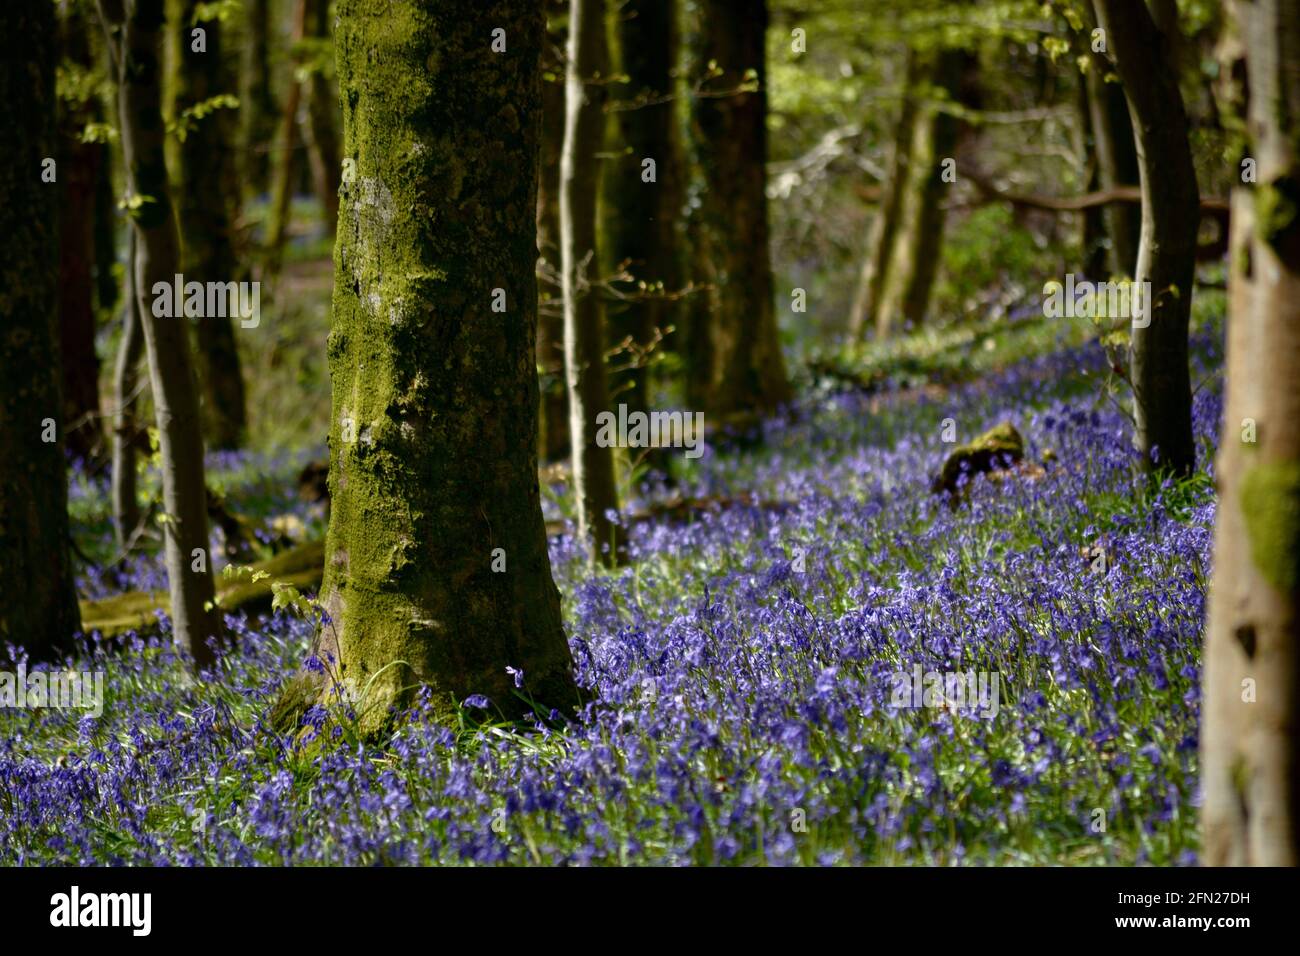 Bluebell woods, the perfect place walk in springtime with a carpet of blue flowers wherever you look. Stock Photo